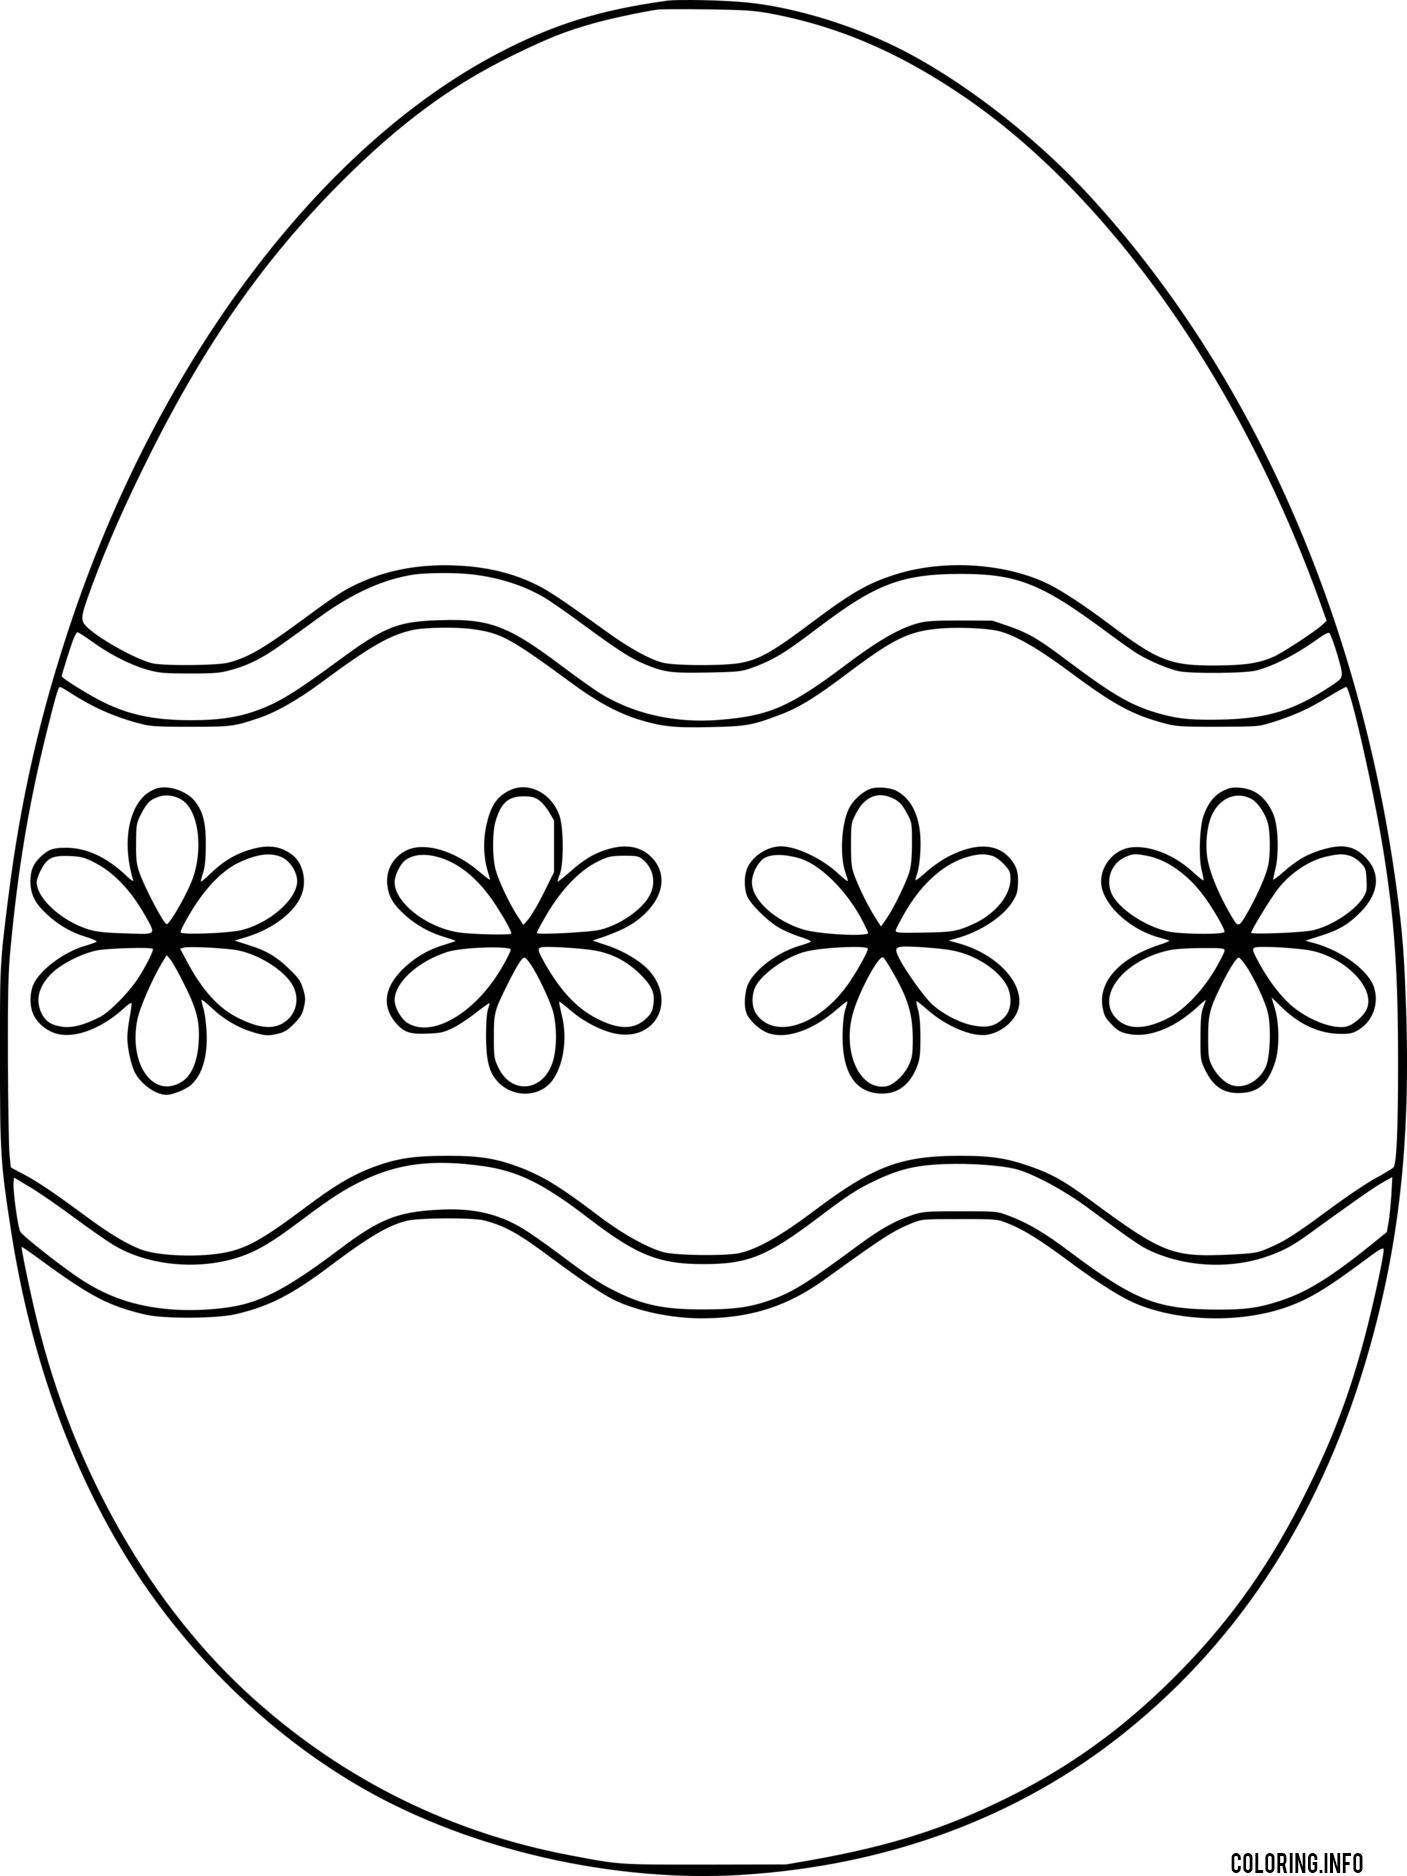 Easter Egg With Four Flowers coloring